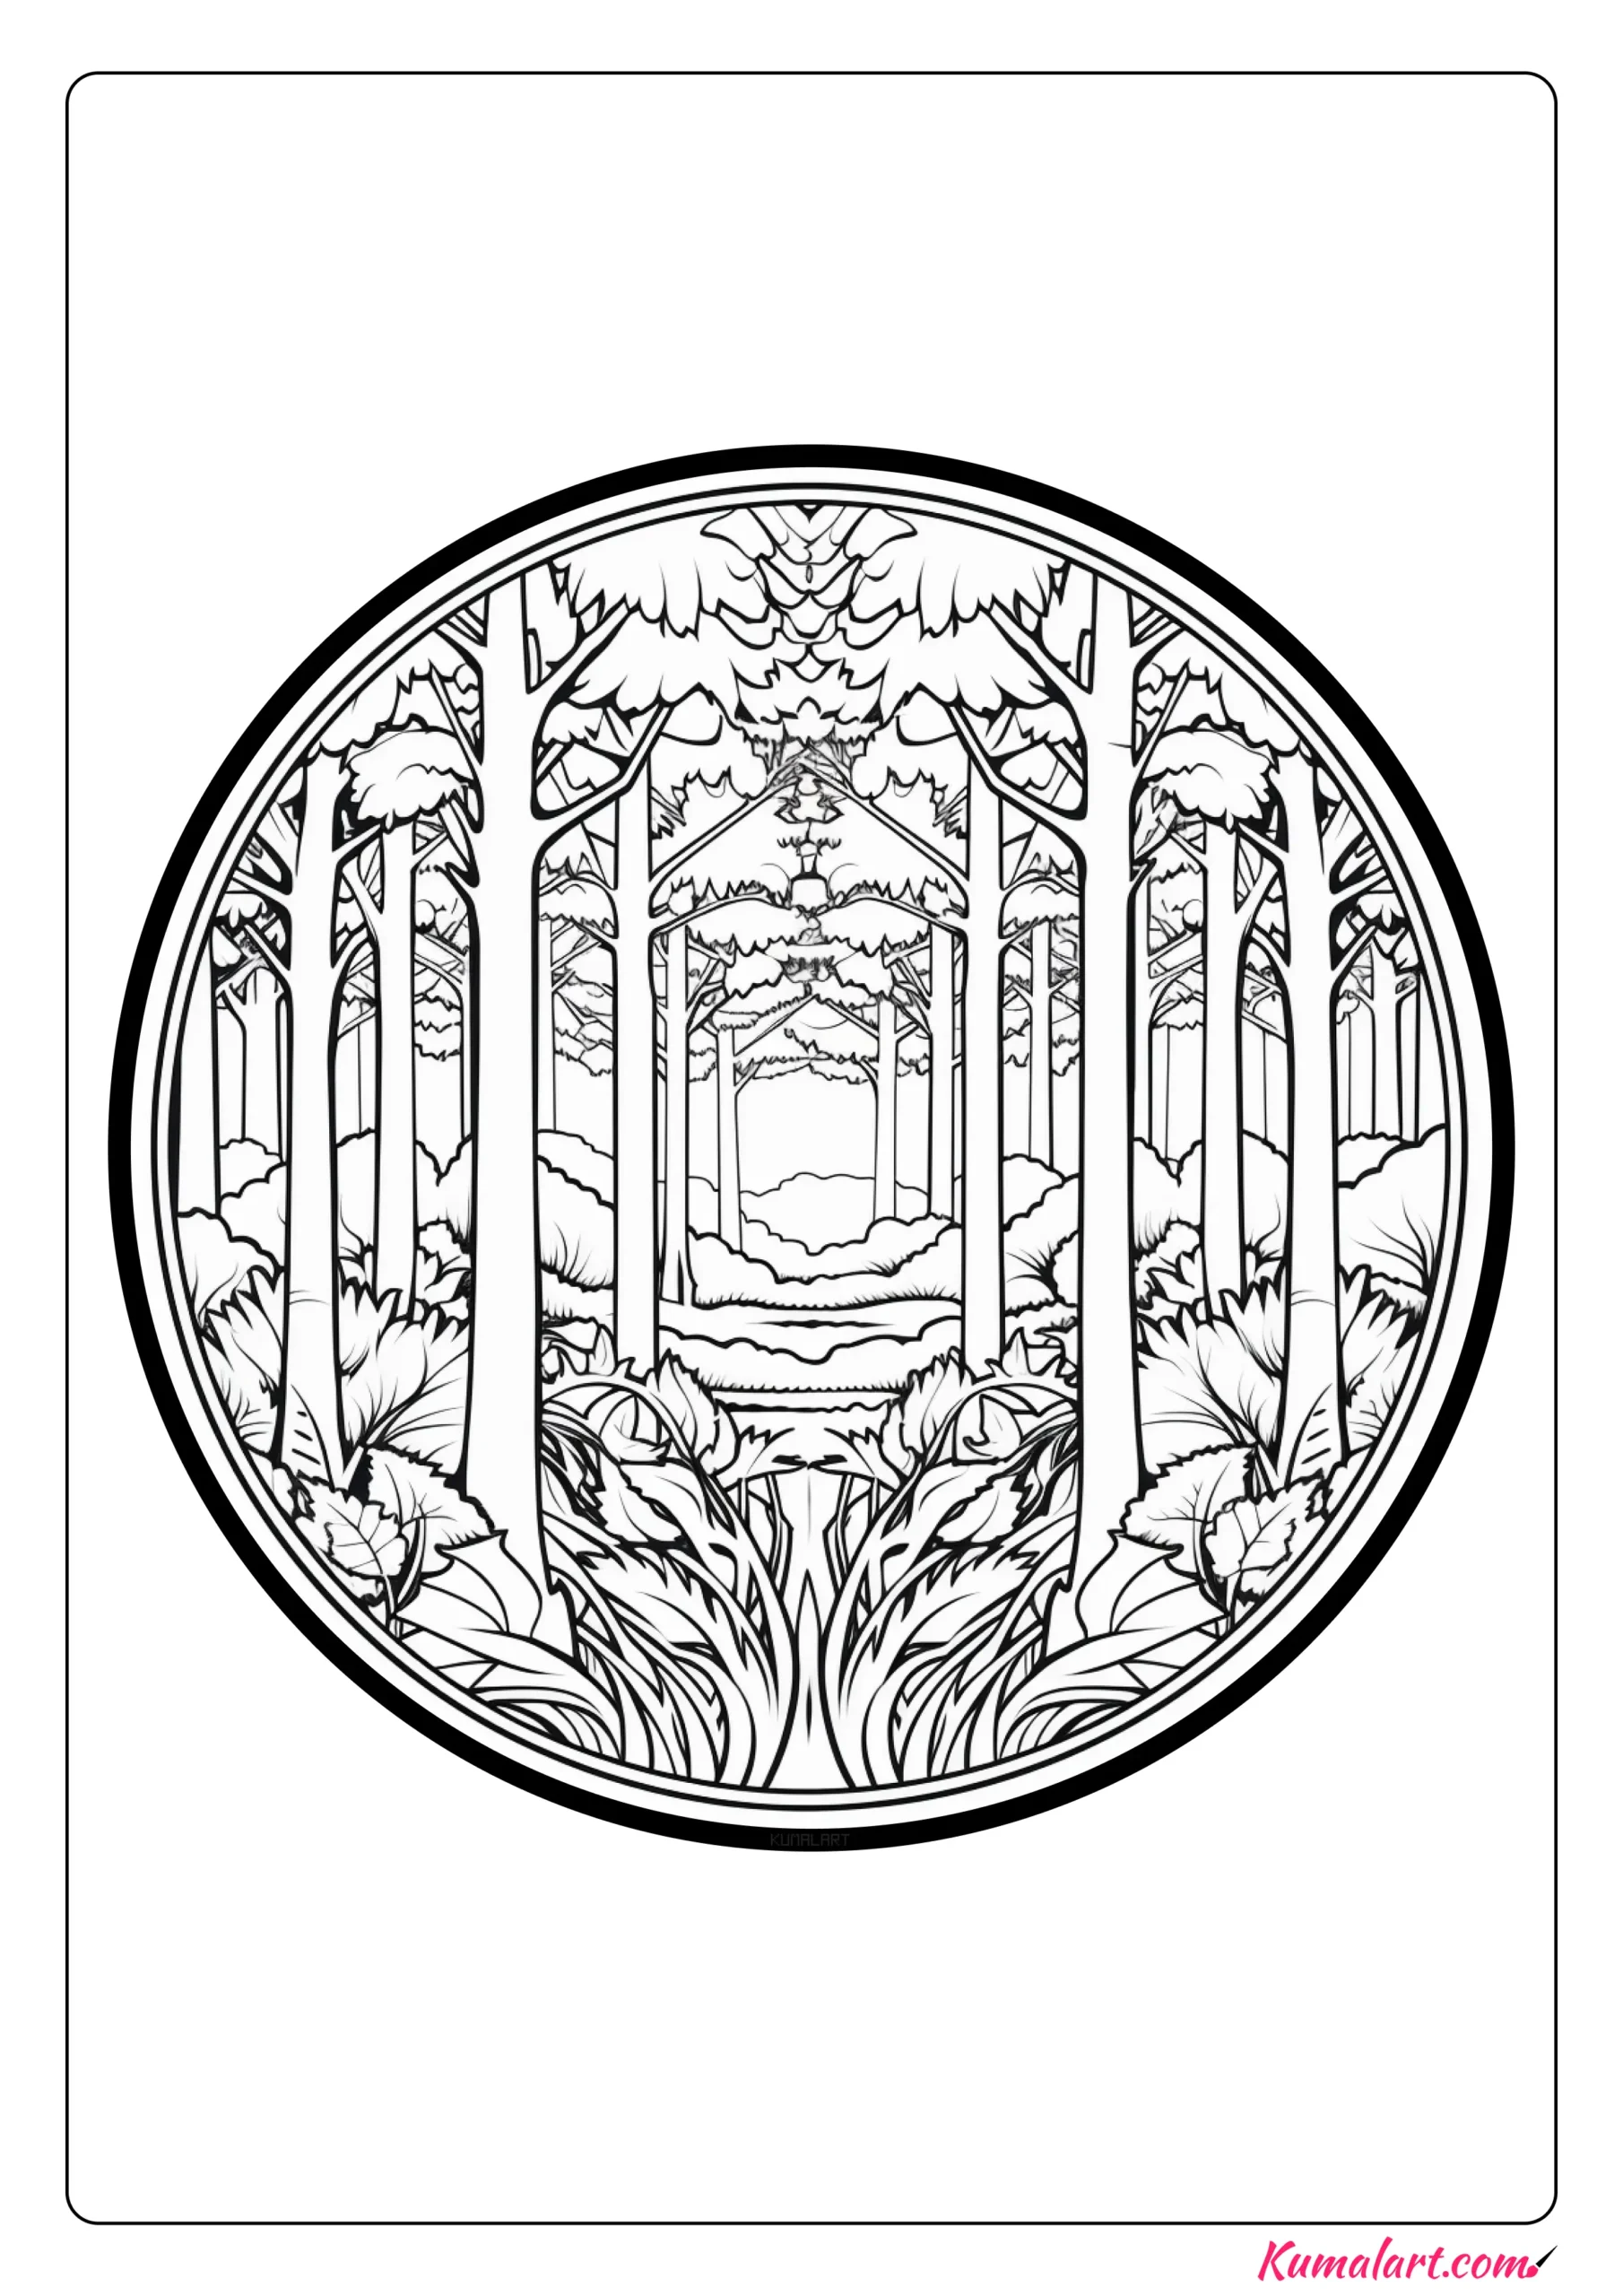 Mysterious Rainforest Coloring Page